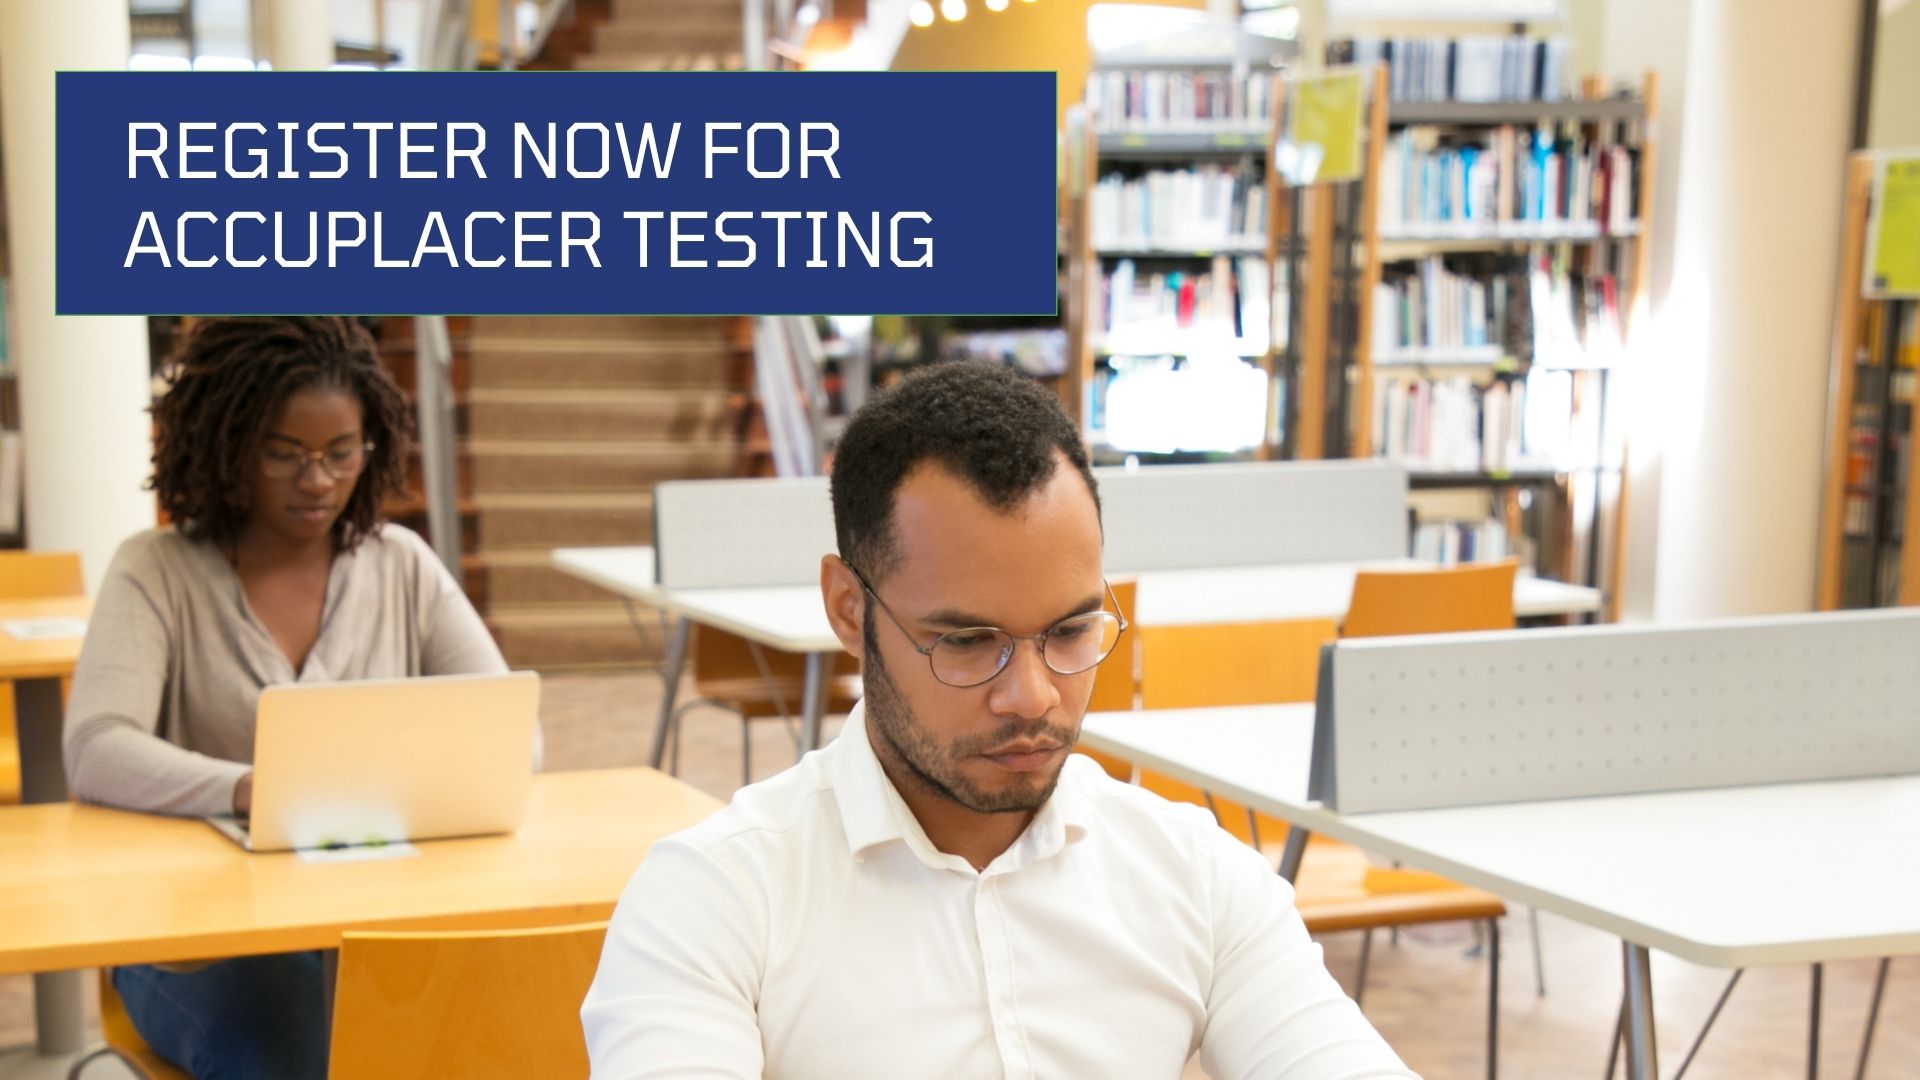 Register Now for Accuplacer Testing